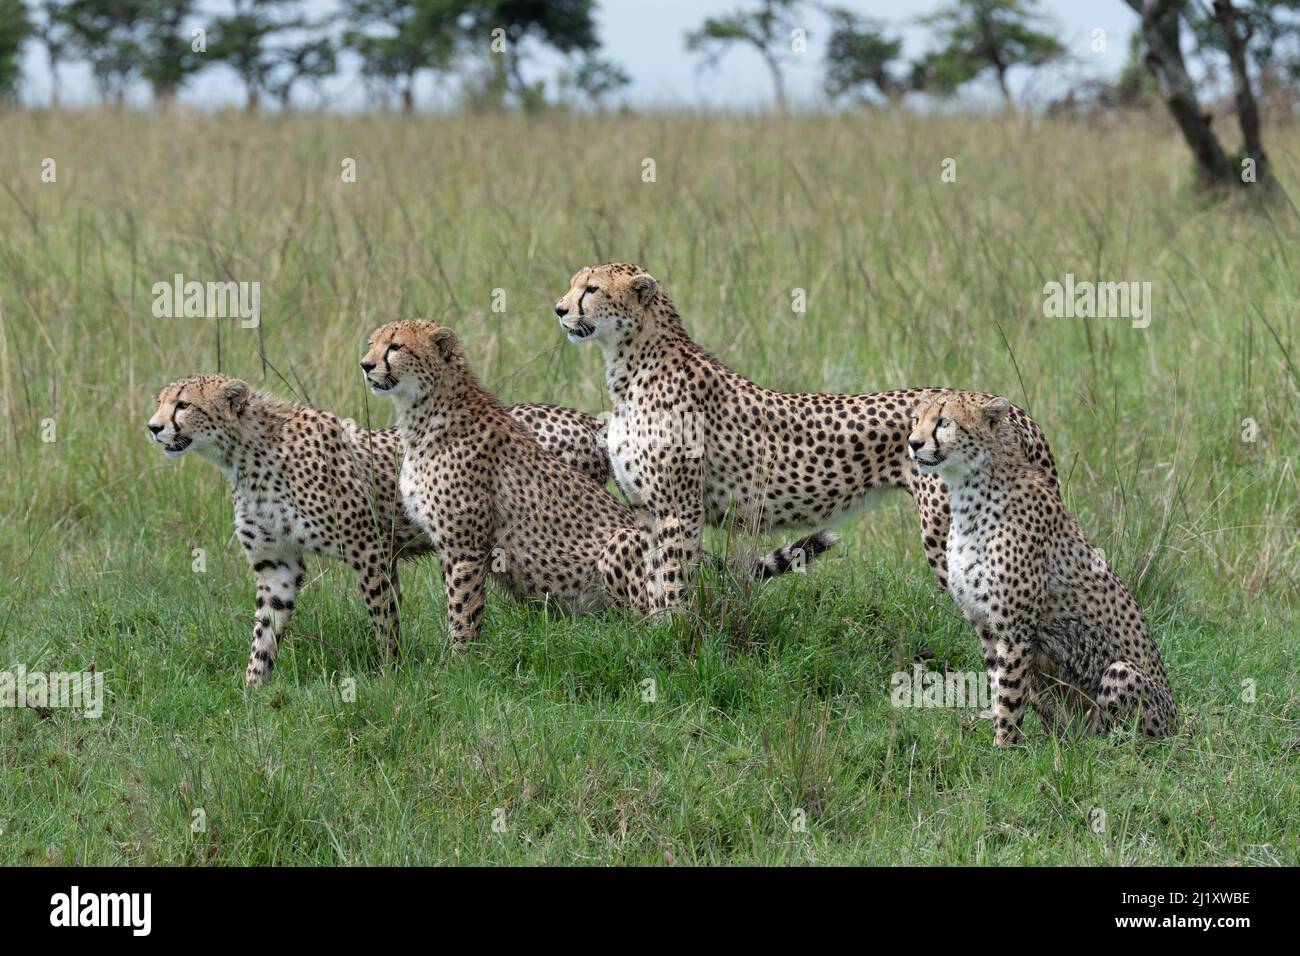 Mother and three Cheetah sub adults watching alertly Stock Photo